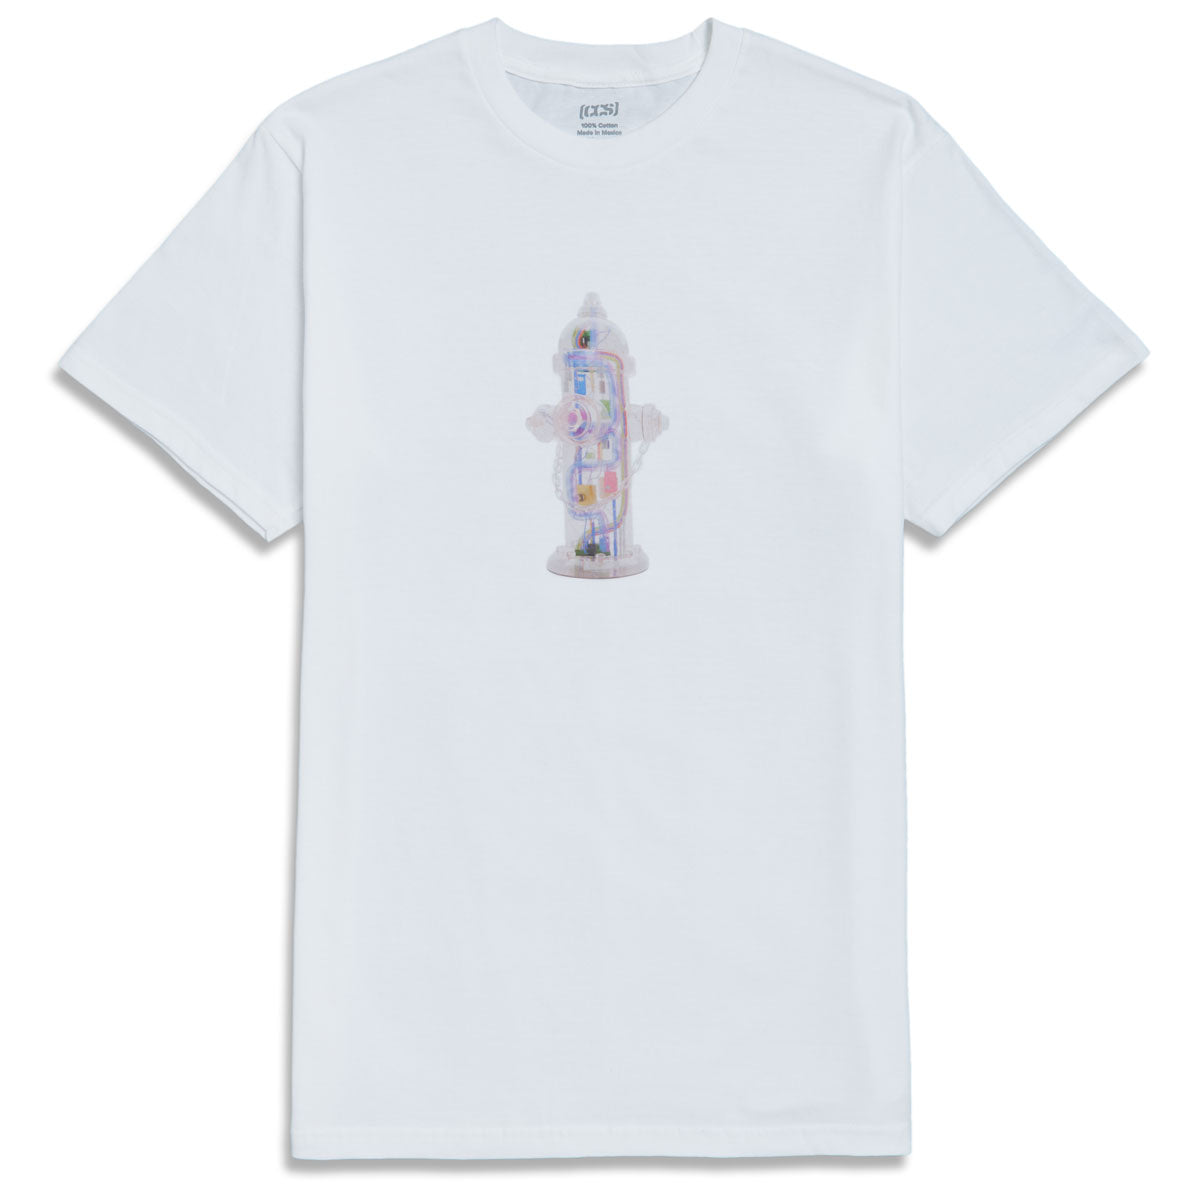 CCS Going Clear Hydrant T-Shirt - White - LG image 1